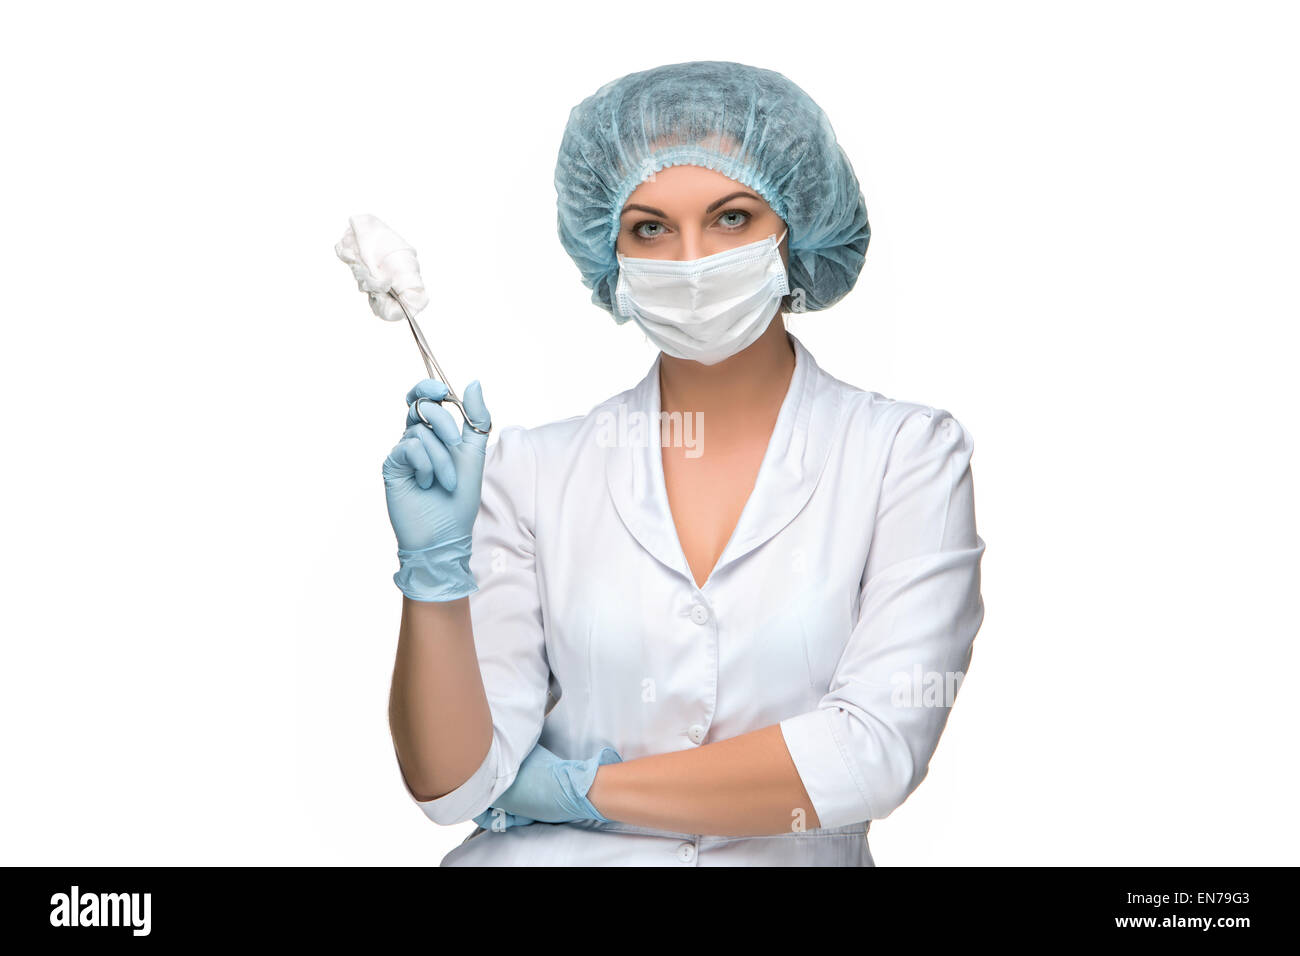 Portrait of lady surgeon holding surgical instrument over white background Stock Photo